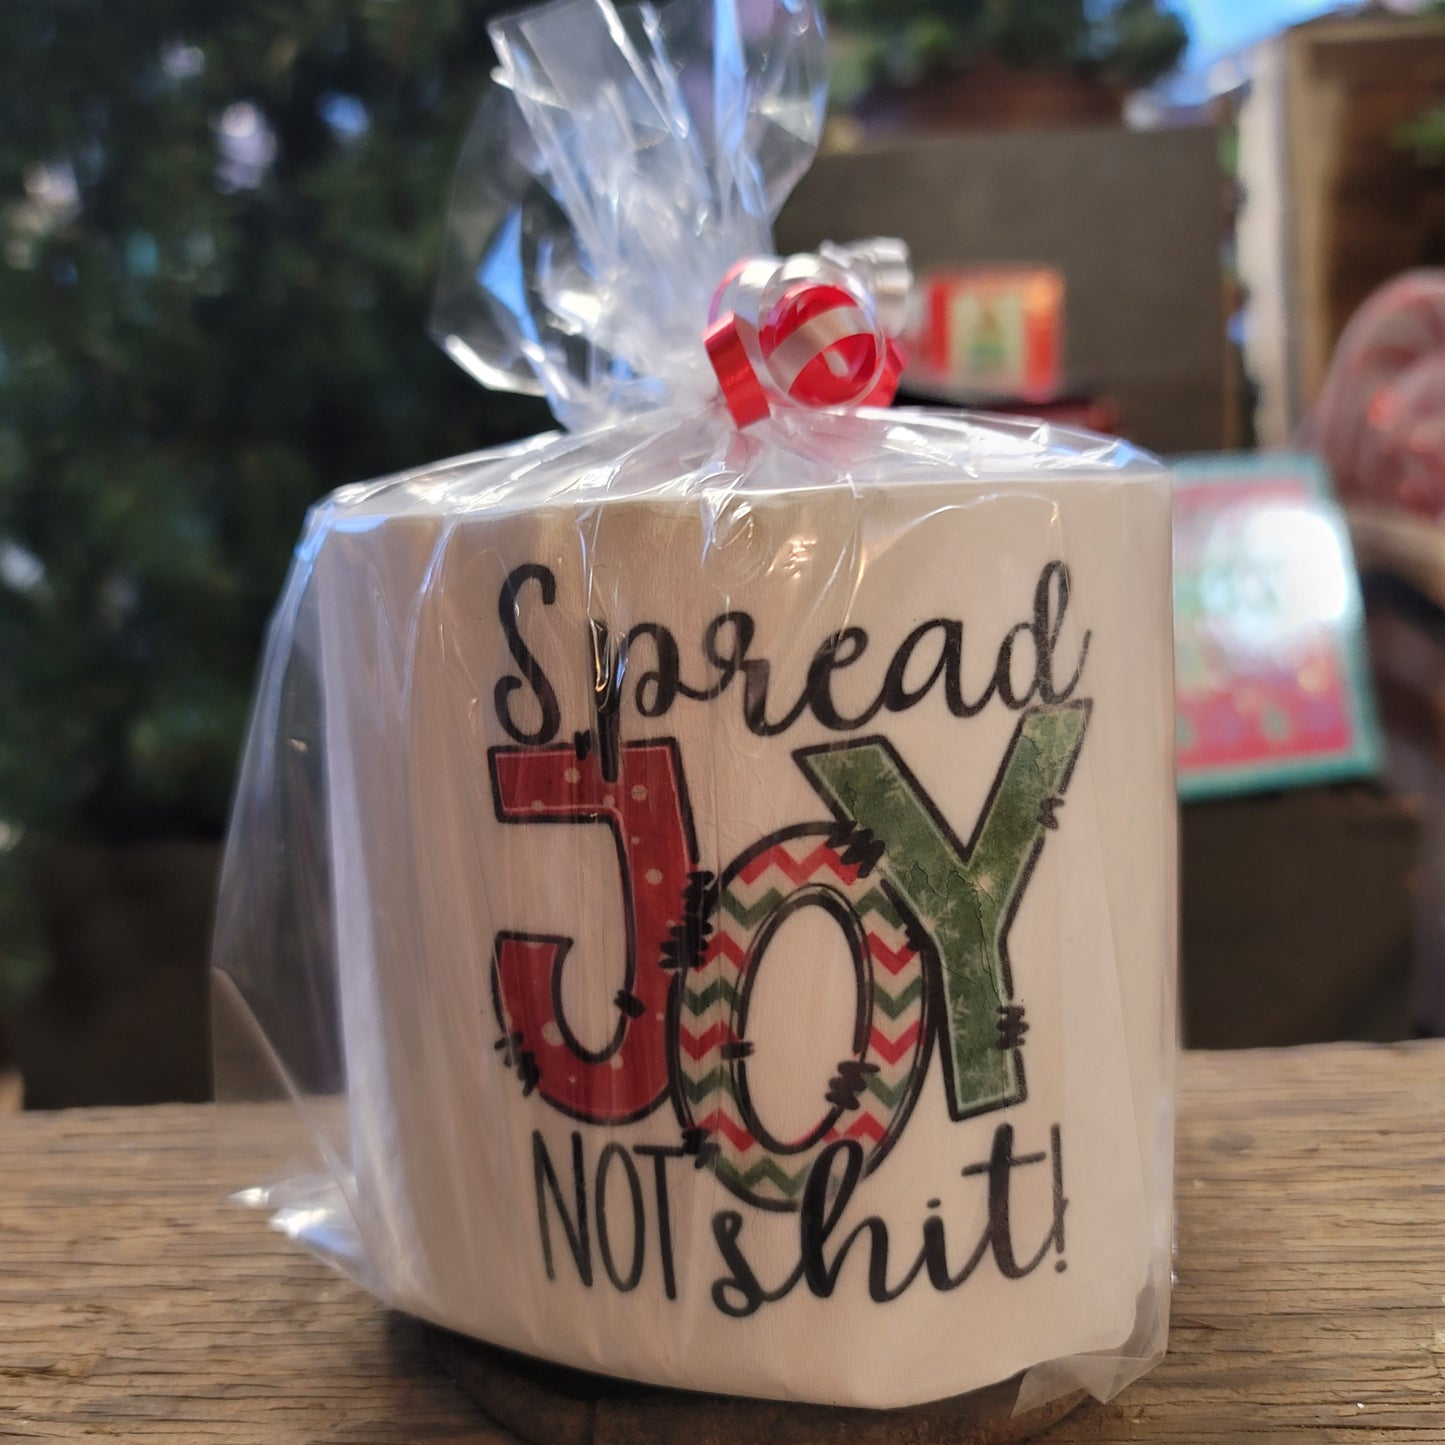 Holiday Toilet Paper Gag Gift